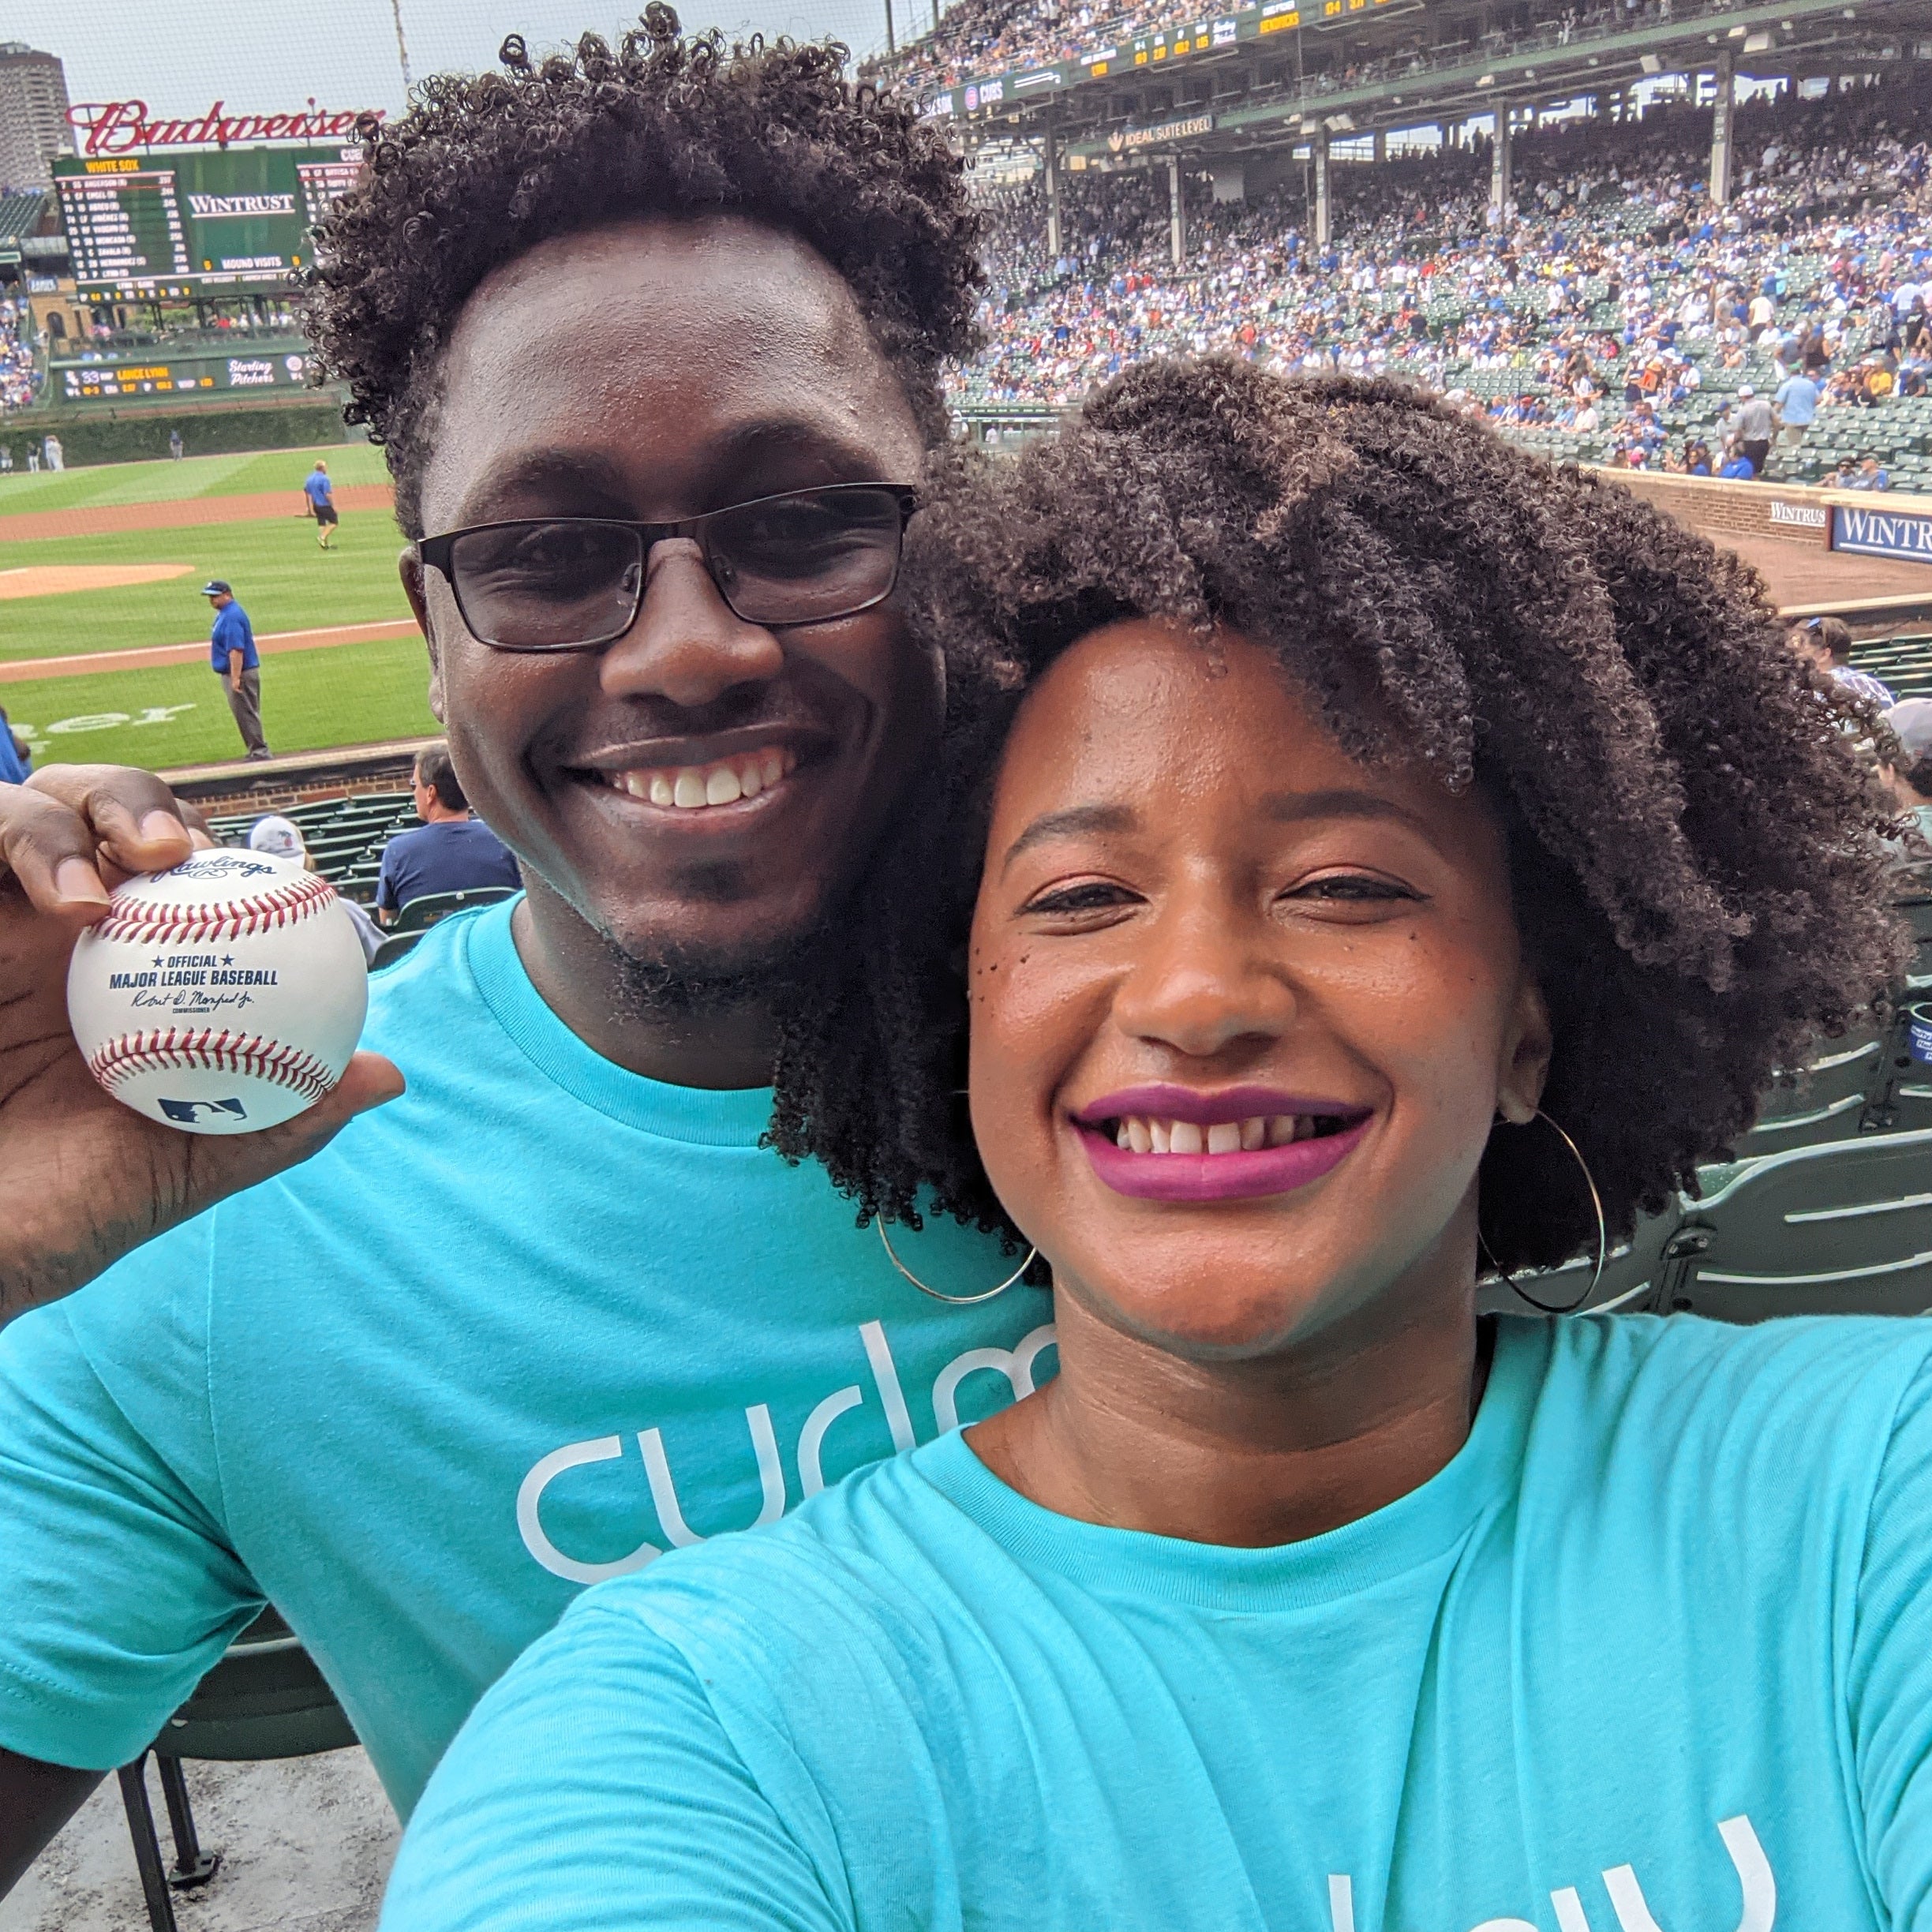 CurlMix throws the first pitch in the Crosstown Classic Cubs vs. White Sox Series!